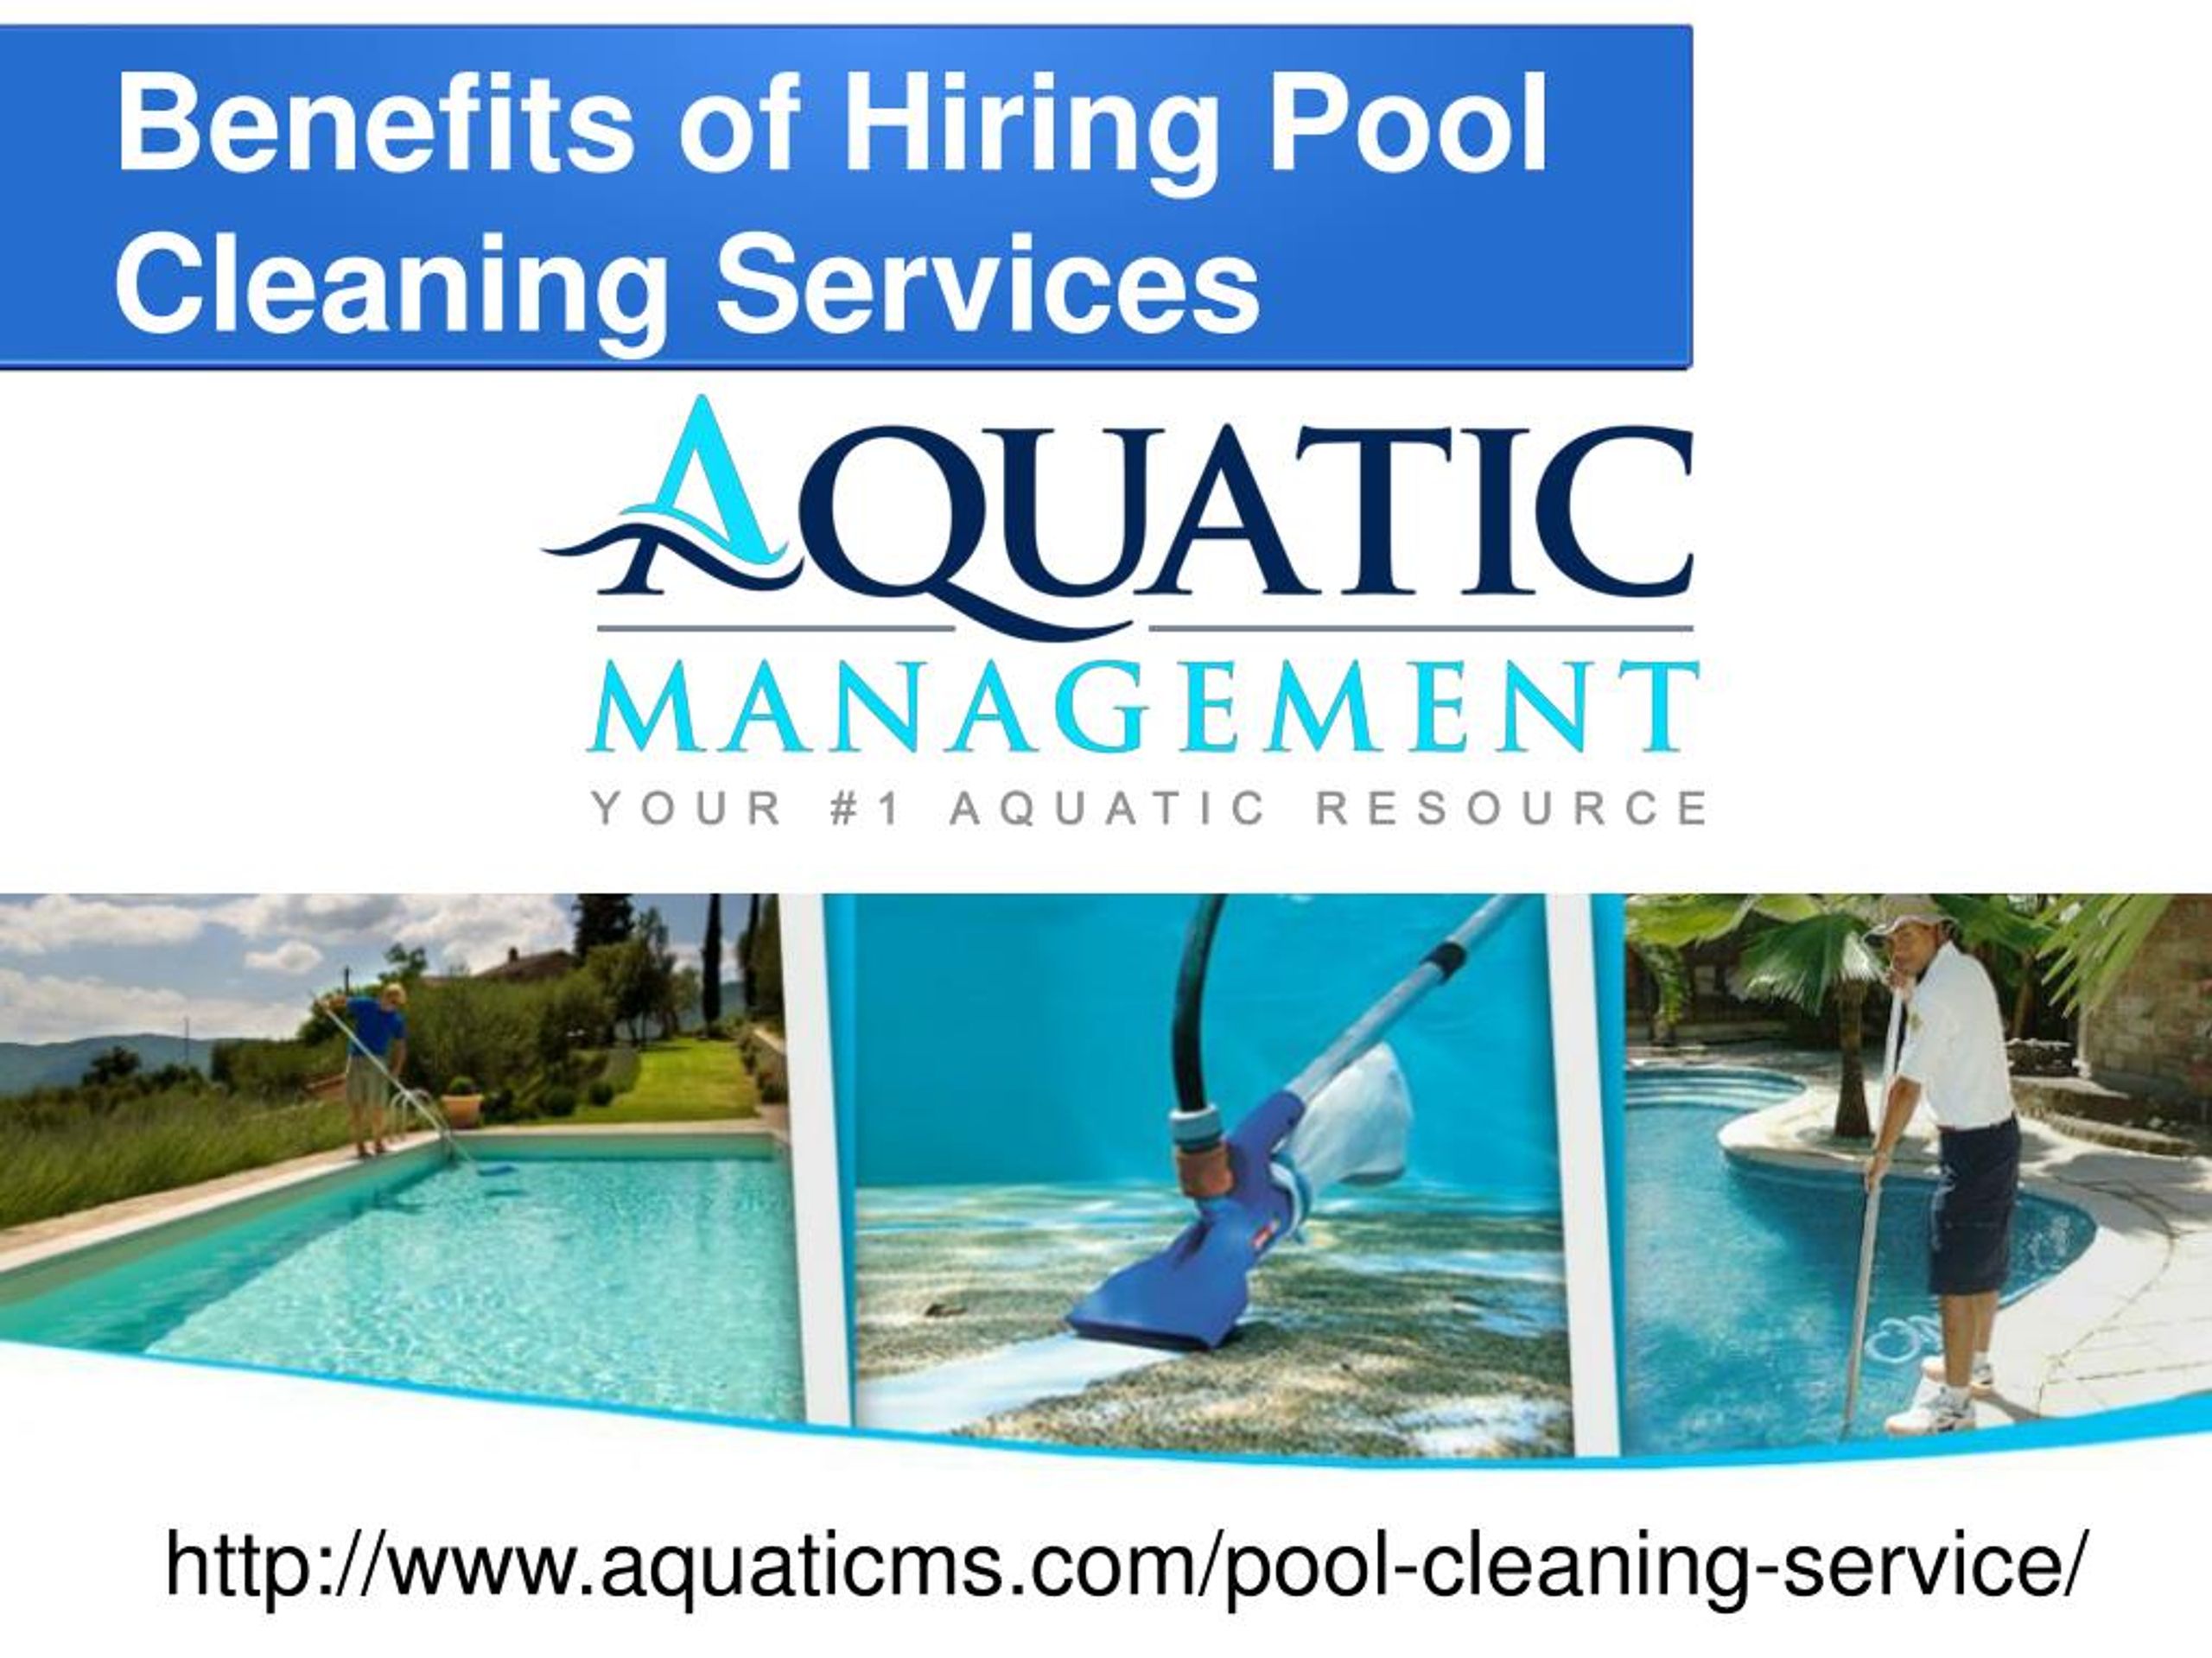 Pool Vacuuming Services